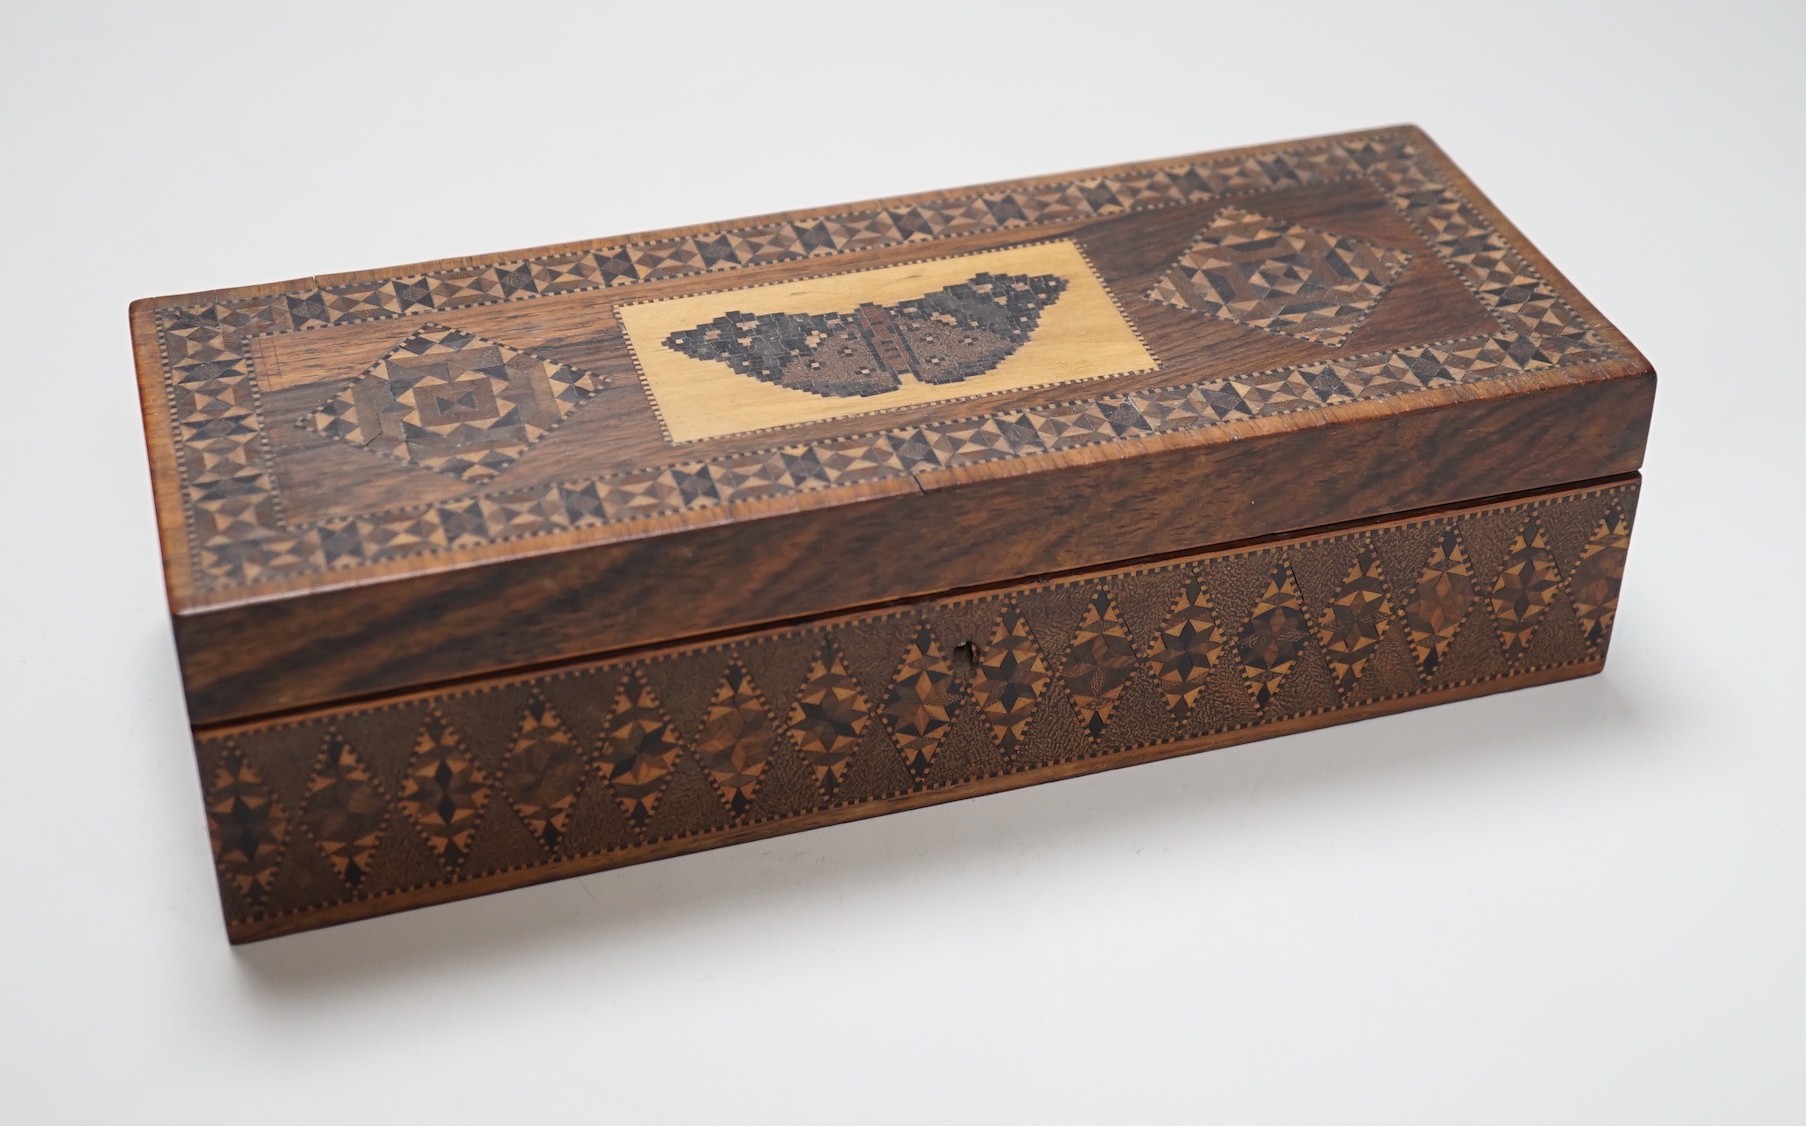 A Tunbridge ware rosewood half square mosaic and butterfly mosaic glove box, c.1830-50, 24cms wide x 6.5 high